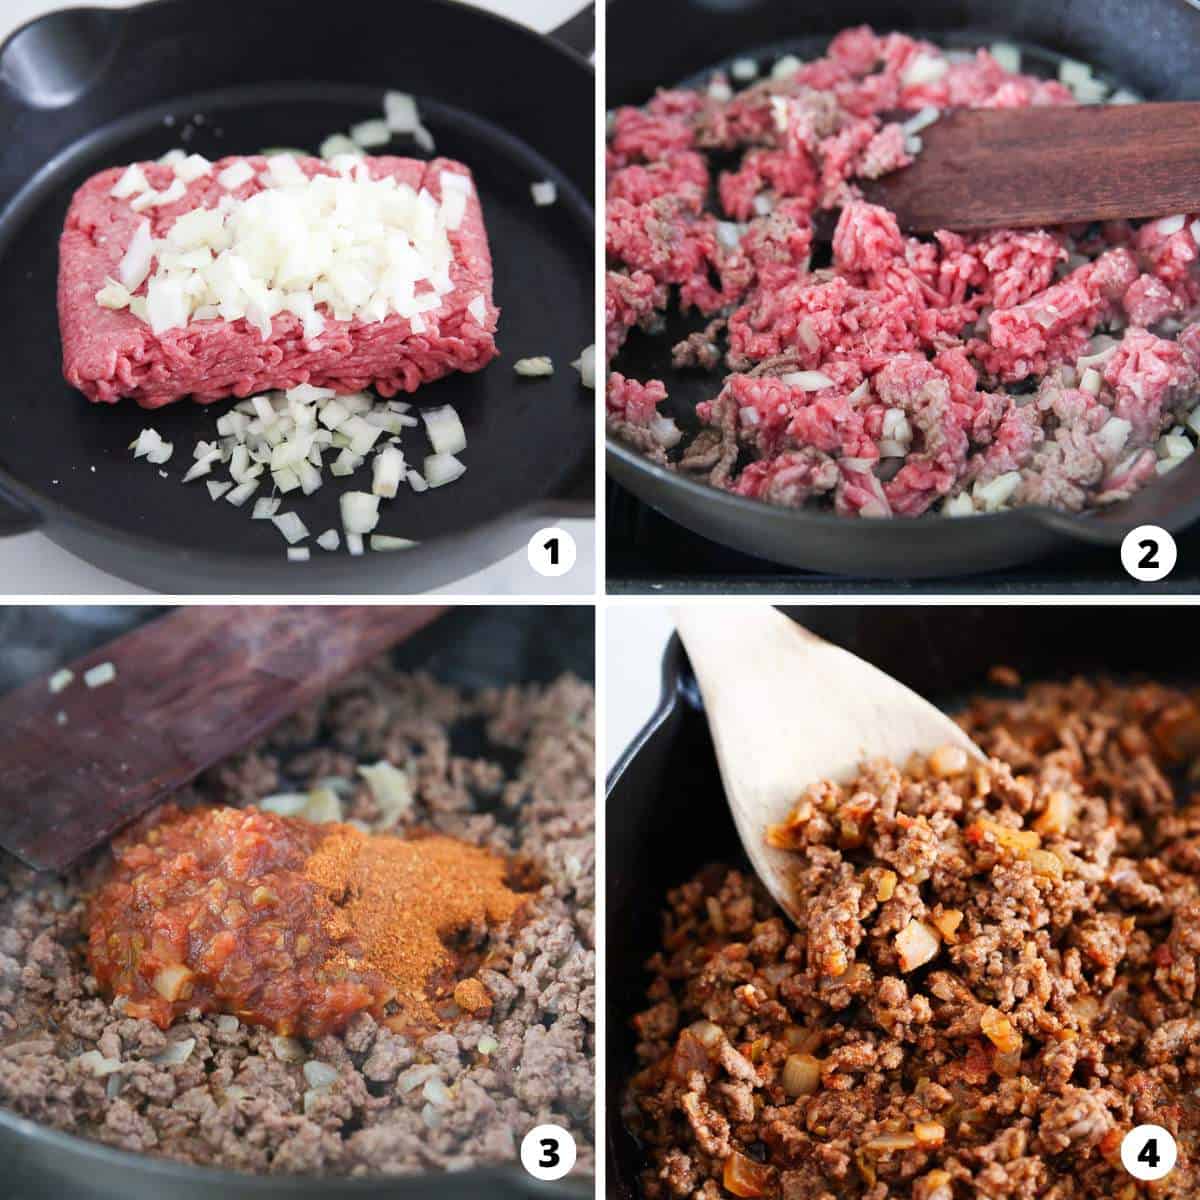 Showing how to make taco meat in a 4 step collage. 